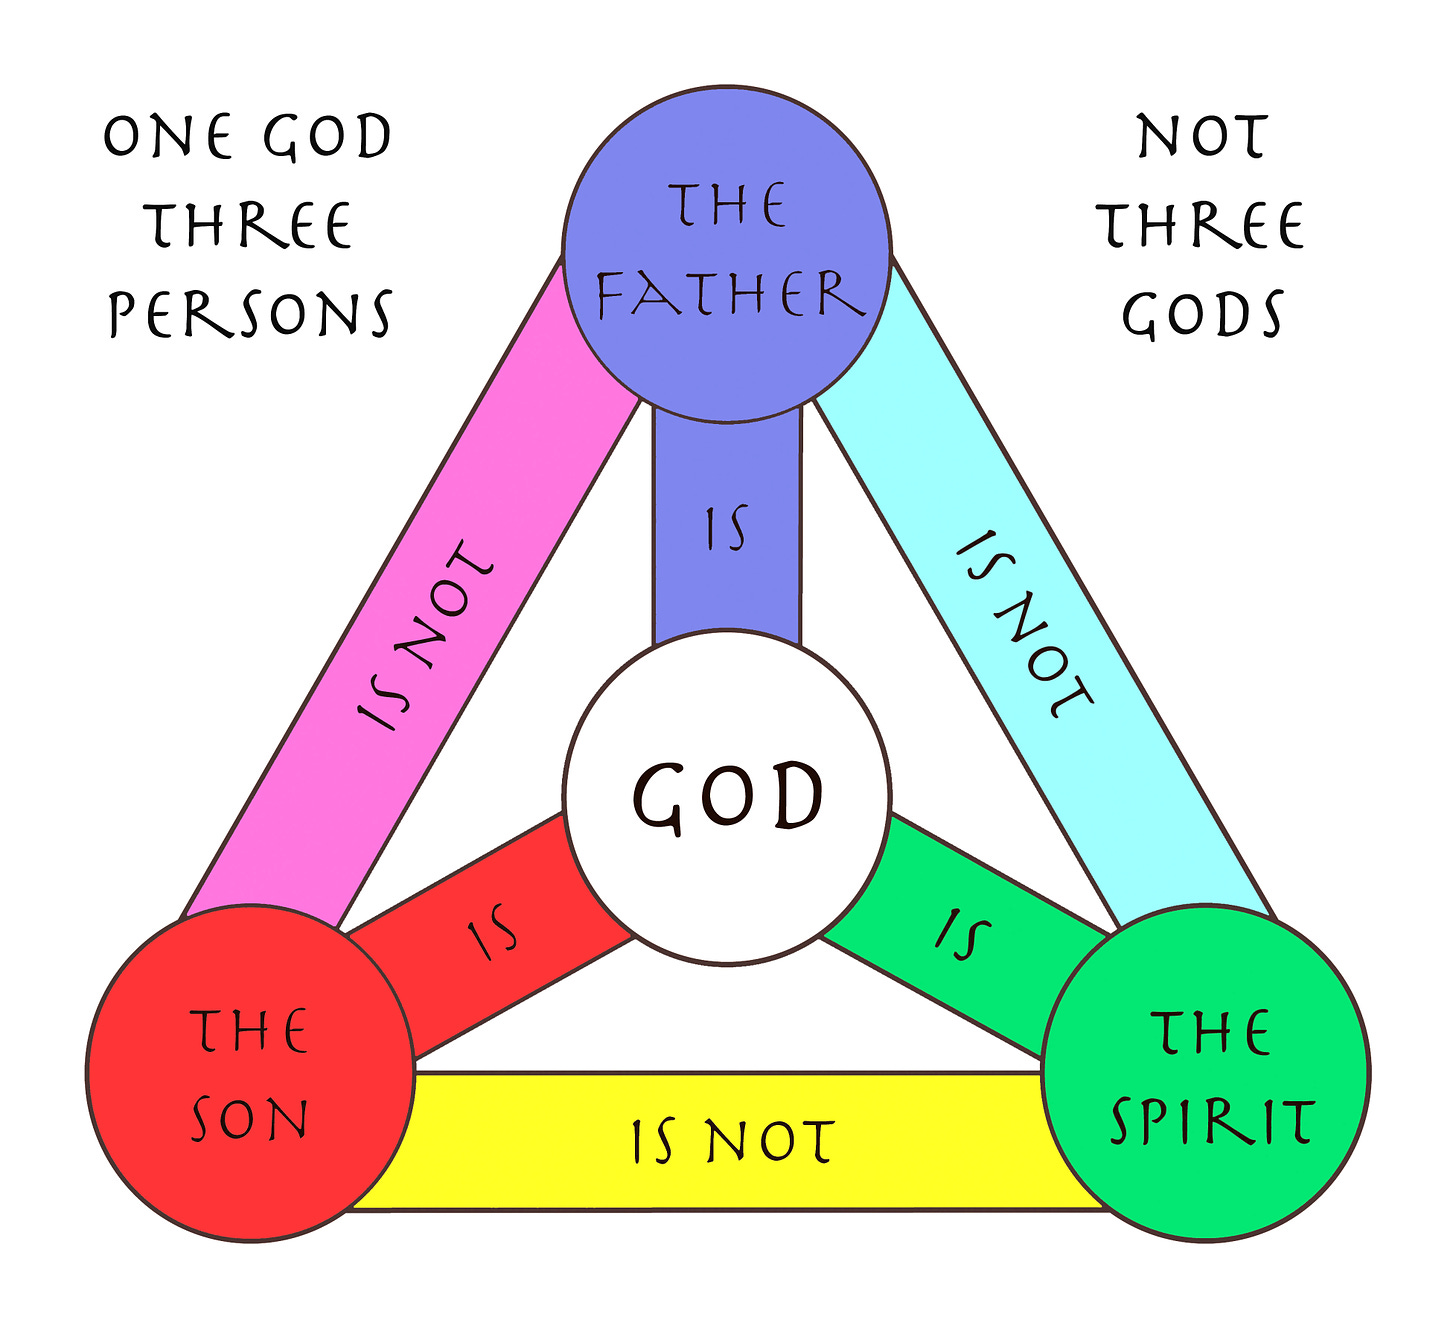 Jesus Christ our Creator: A biblical defence of the Trinity